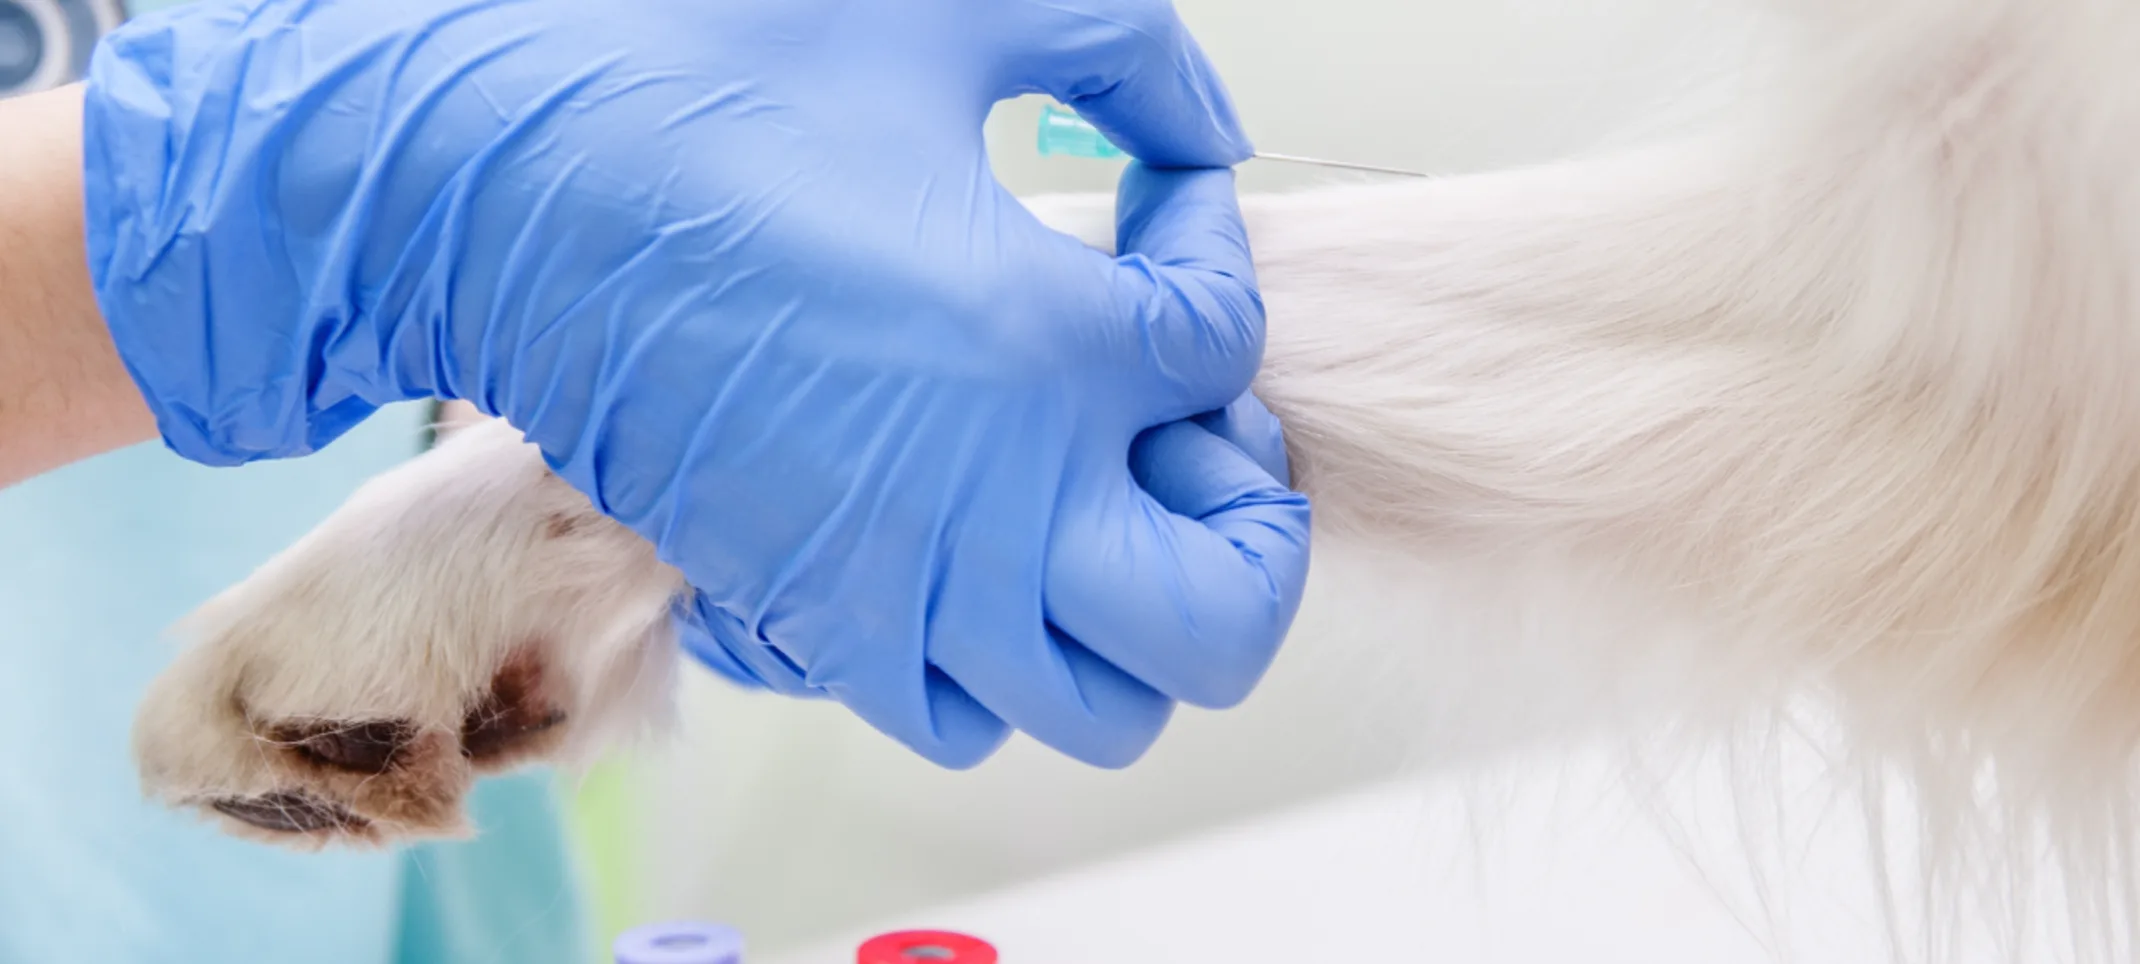 A white fury dog's leg is getting injected by a needle by a veterinarian